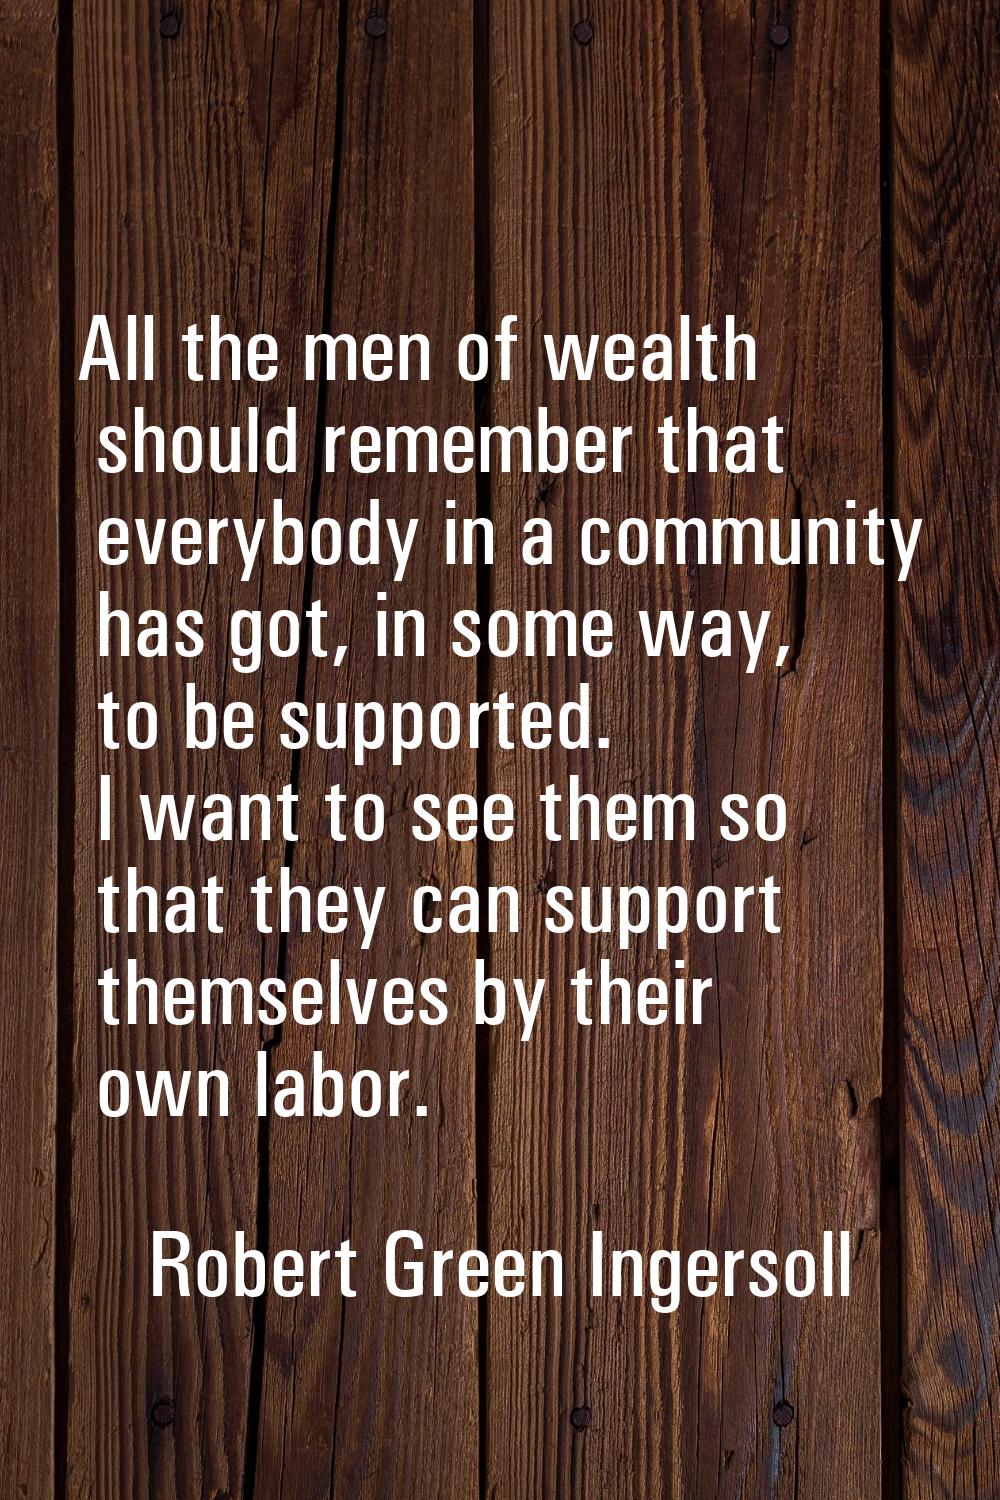 All the men of wealth should remember that everybody in a community has got, in some way, to be sup